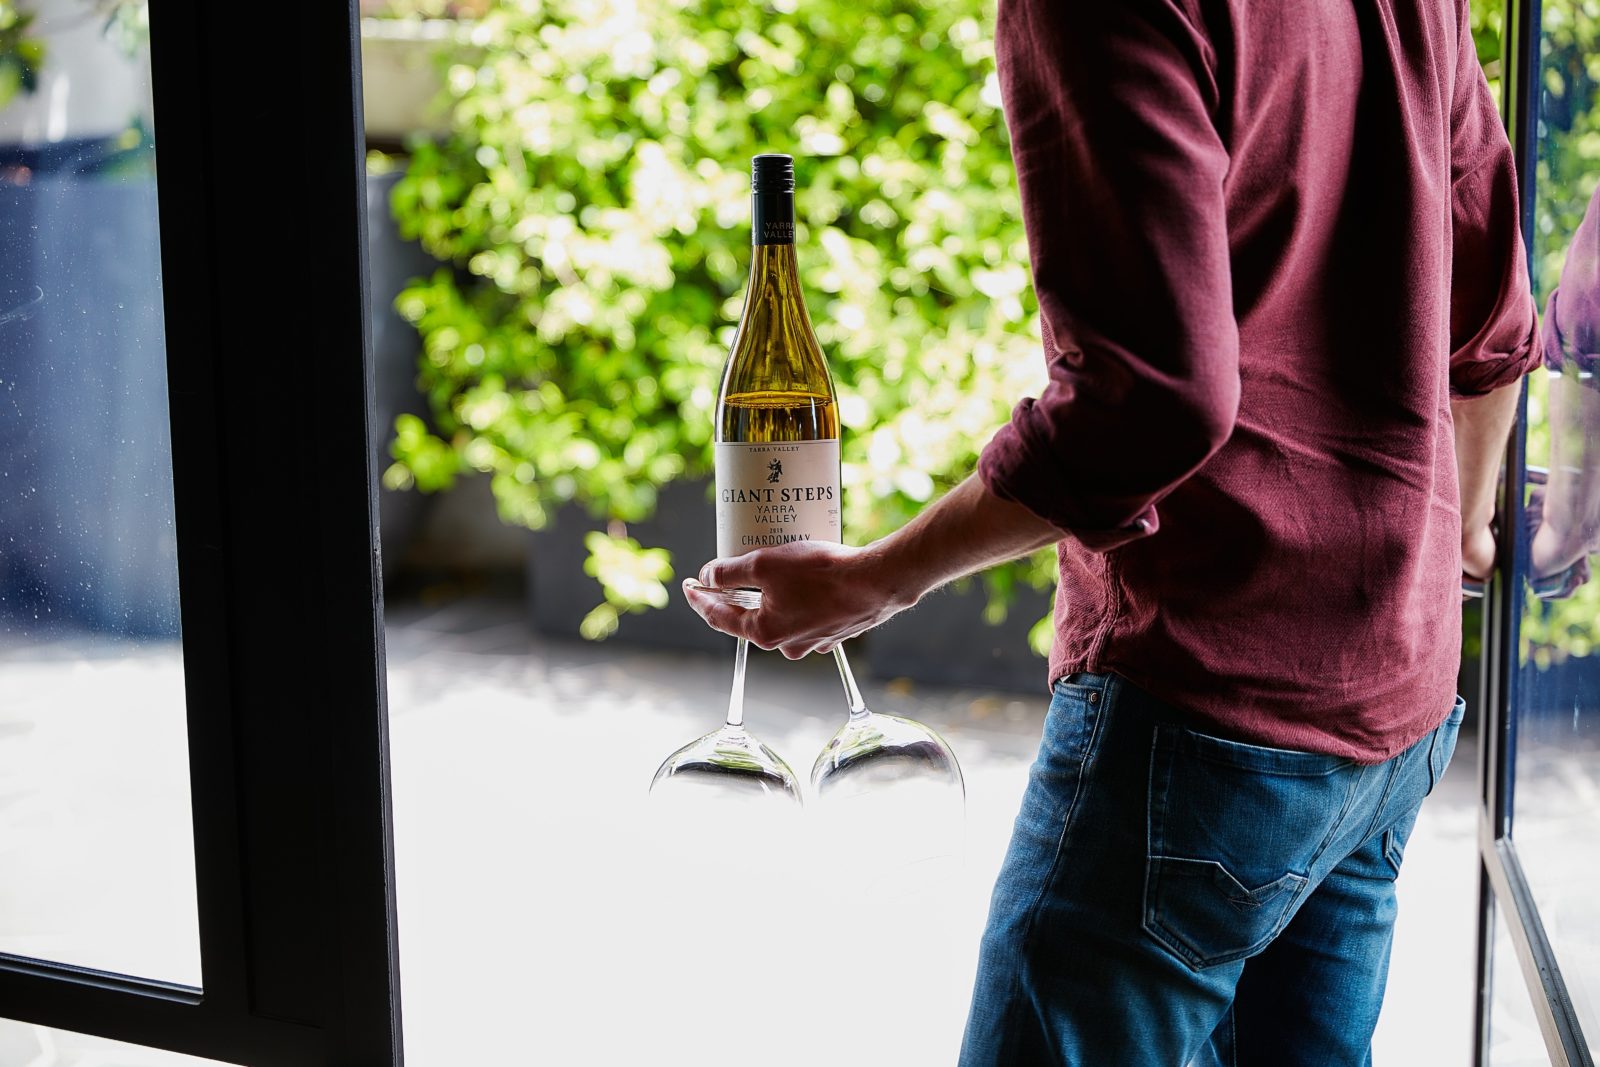 A Giant Steps Chardonnay being tasted in the courtyard.